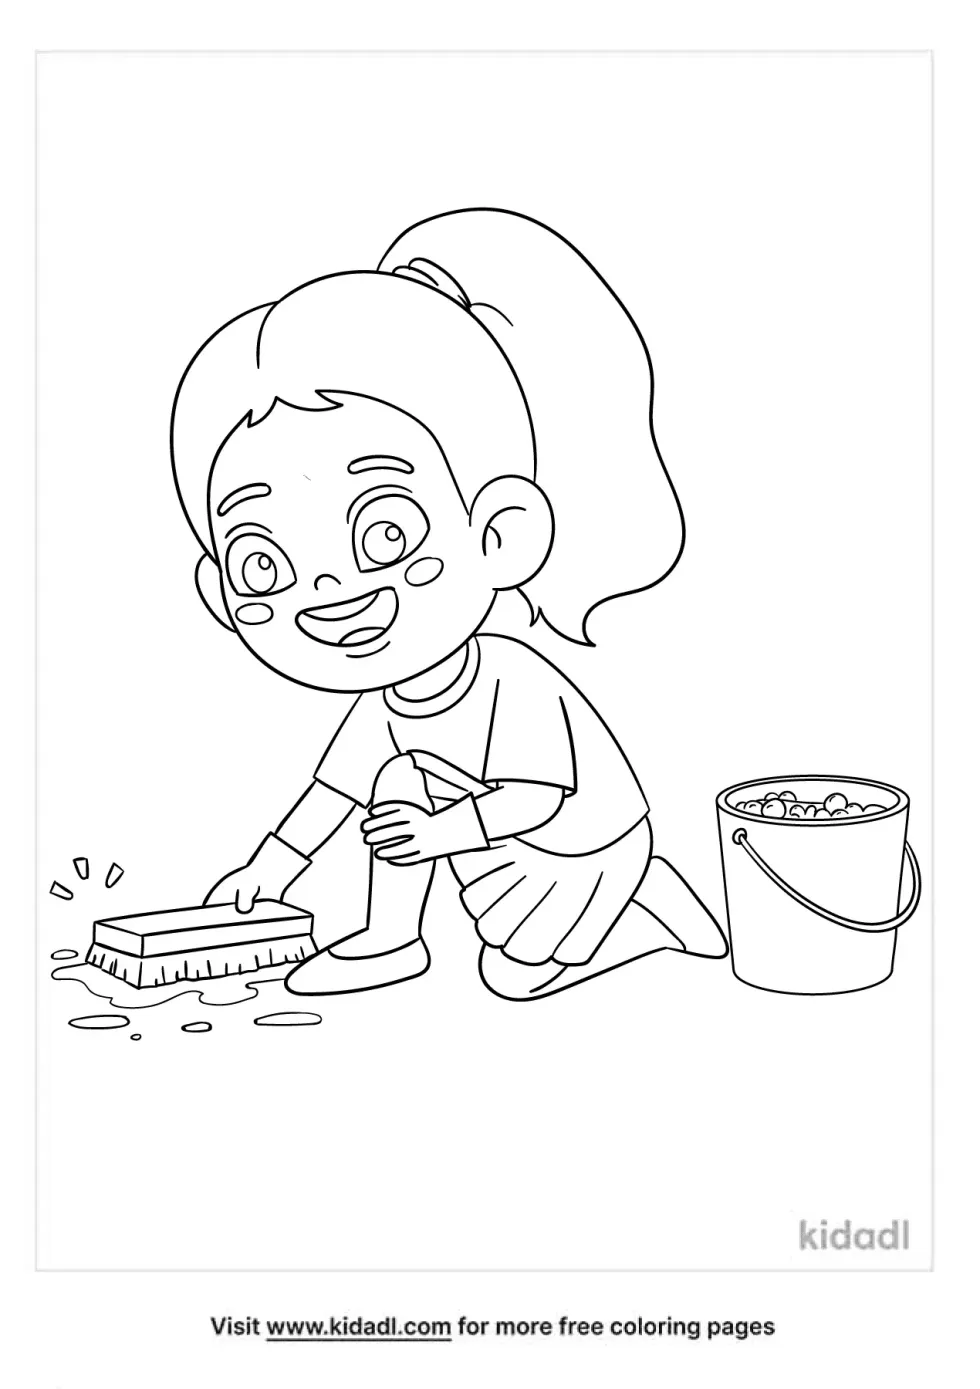 Chore Coloring Page